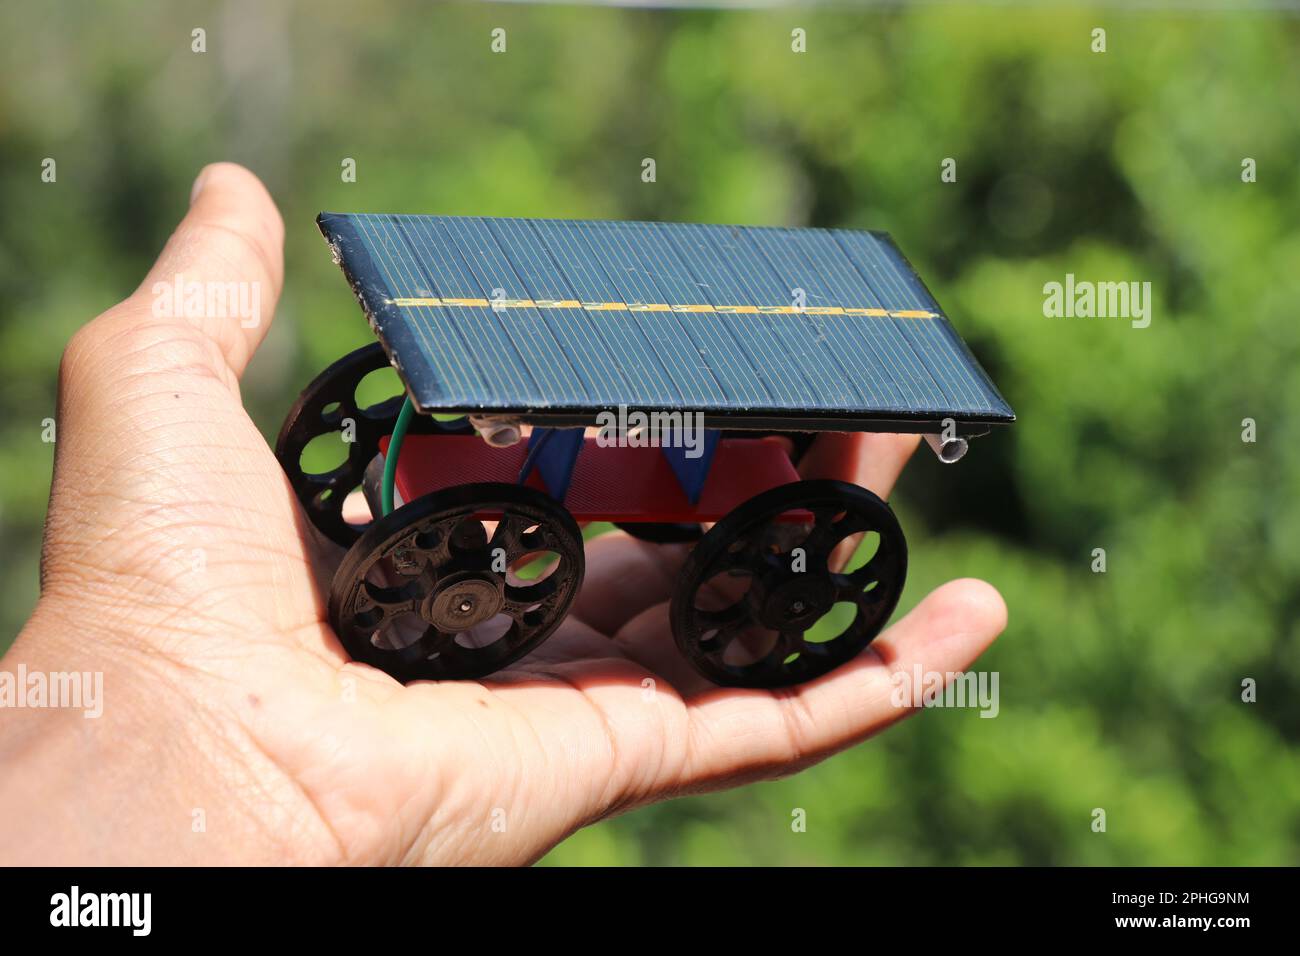 Solar powered car made from photovoltaic cell and 3D printed wheels powered by a small dc motor held in hand Stock Photo